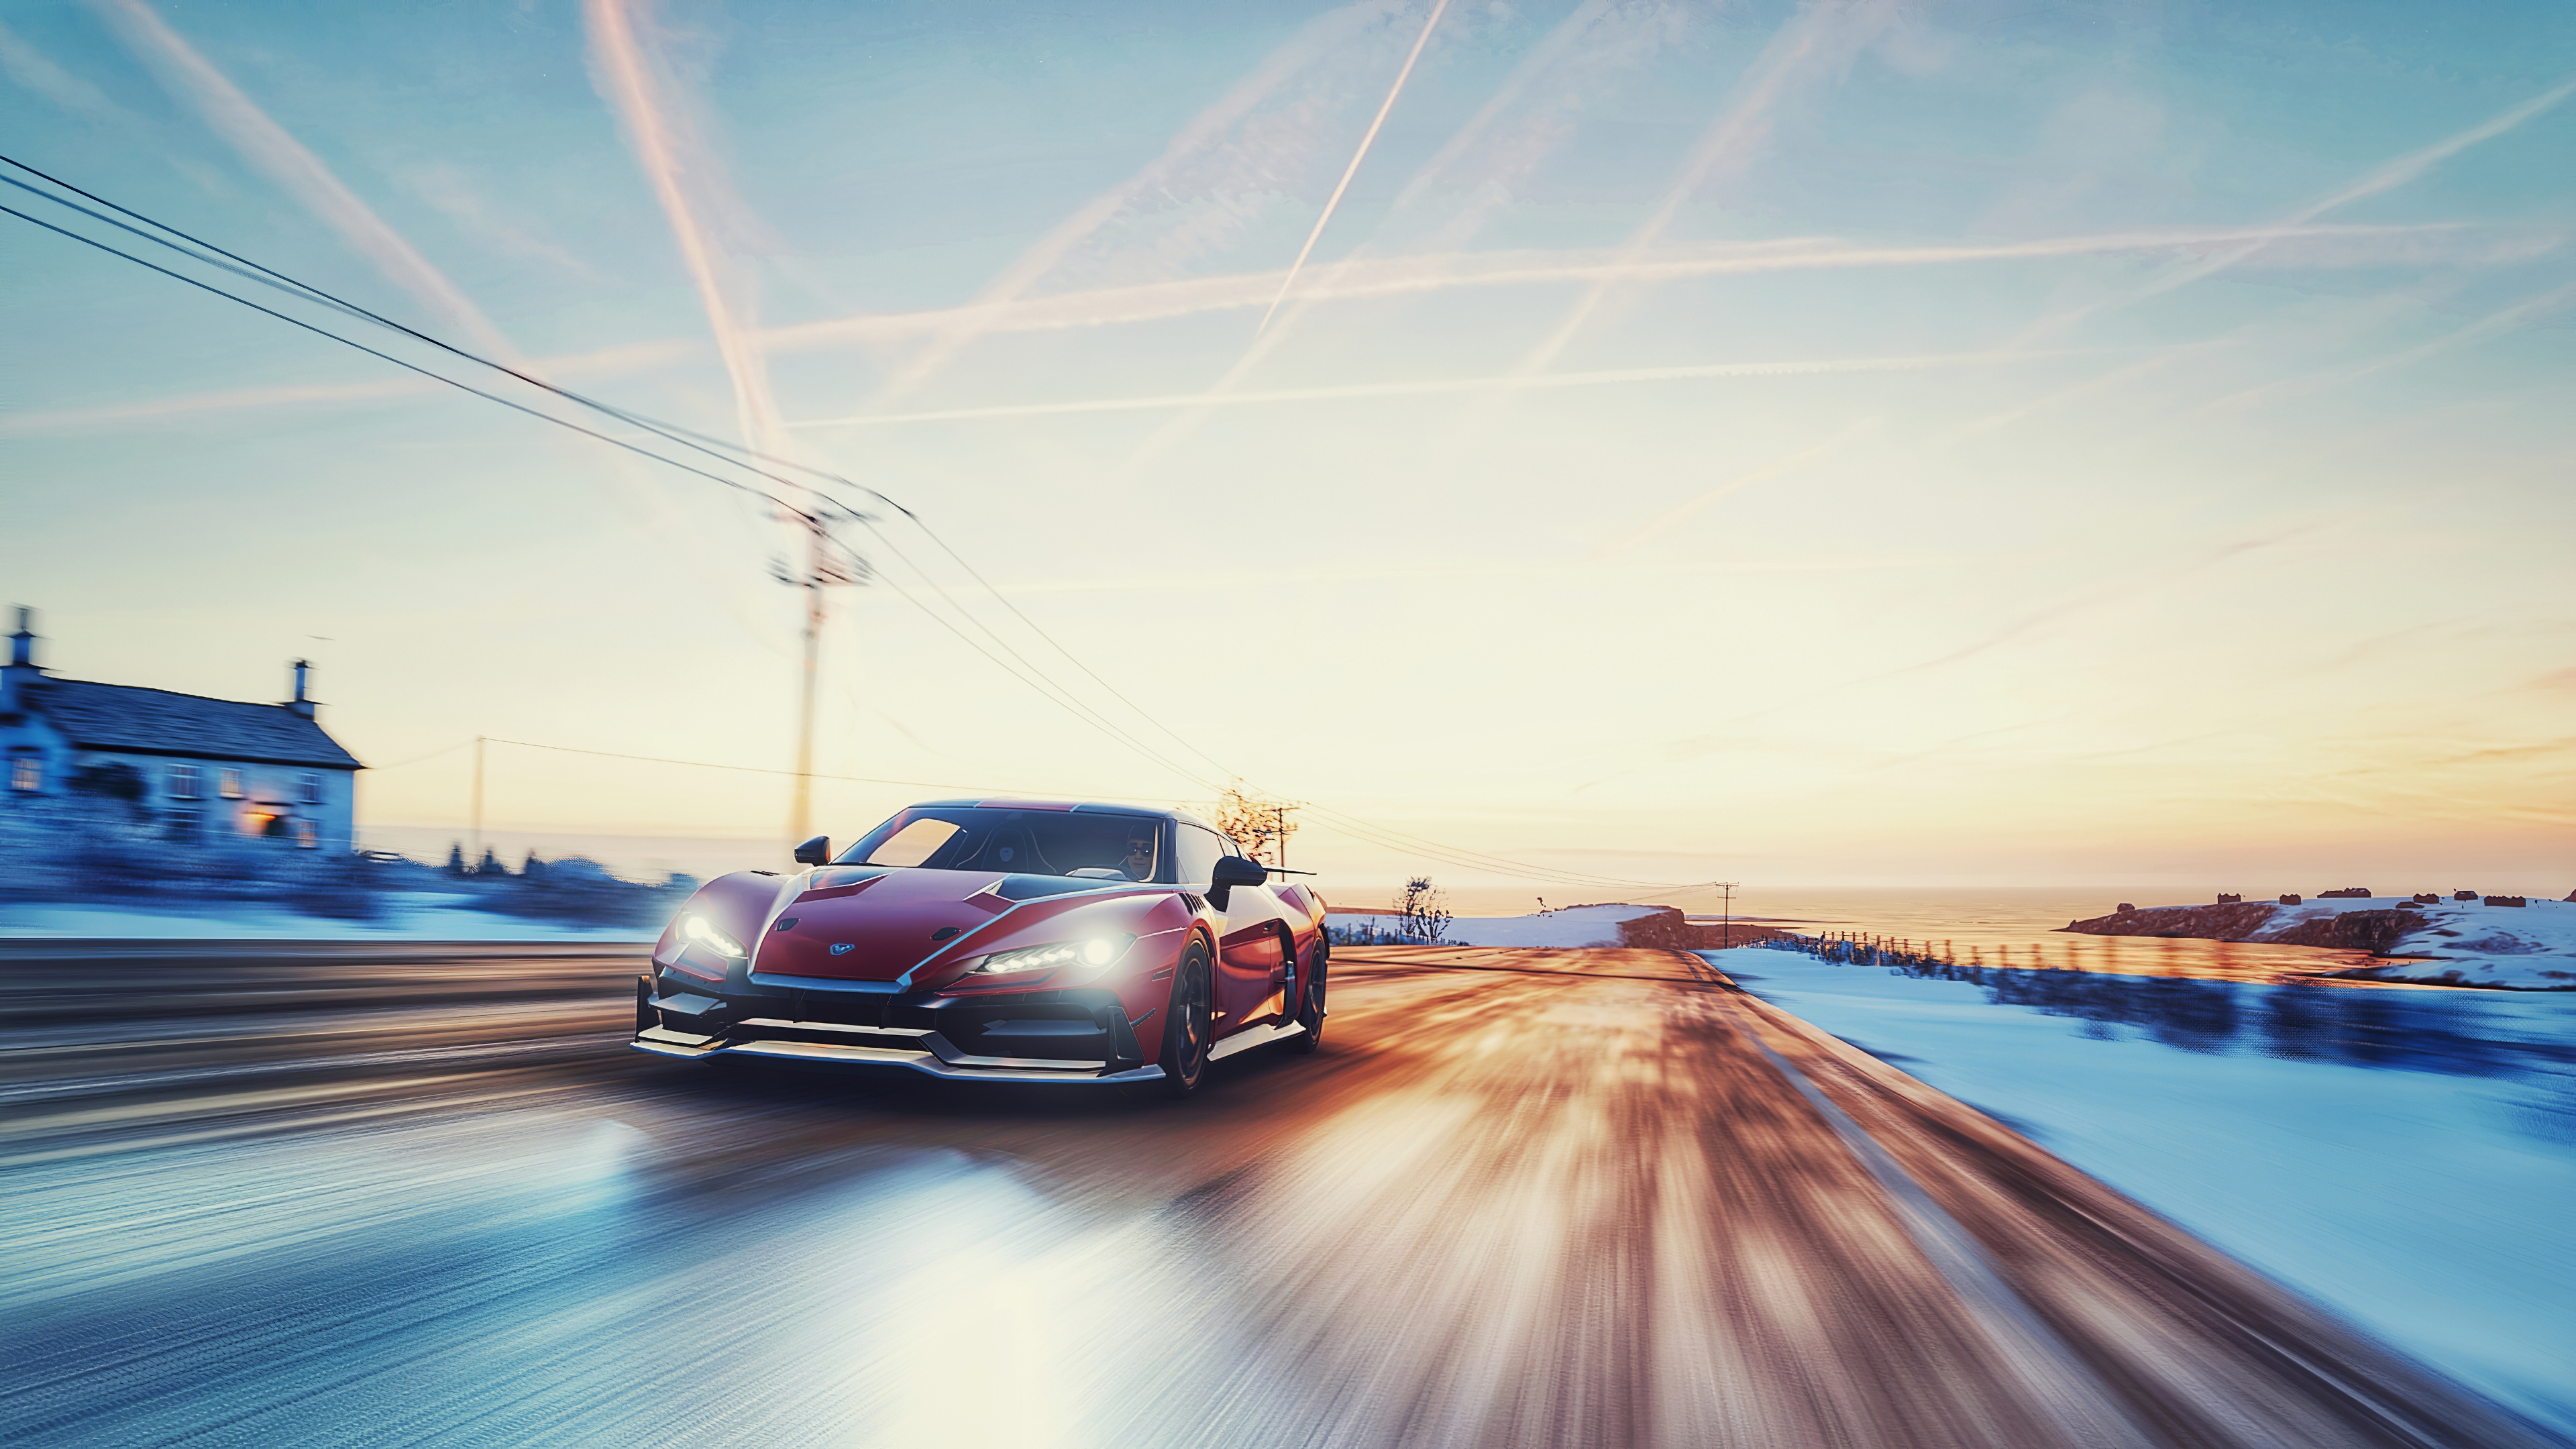 2020 Forza Horizon 4, HD Games, 4k Wallpapers, Images, Backgrounds